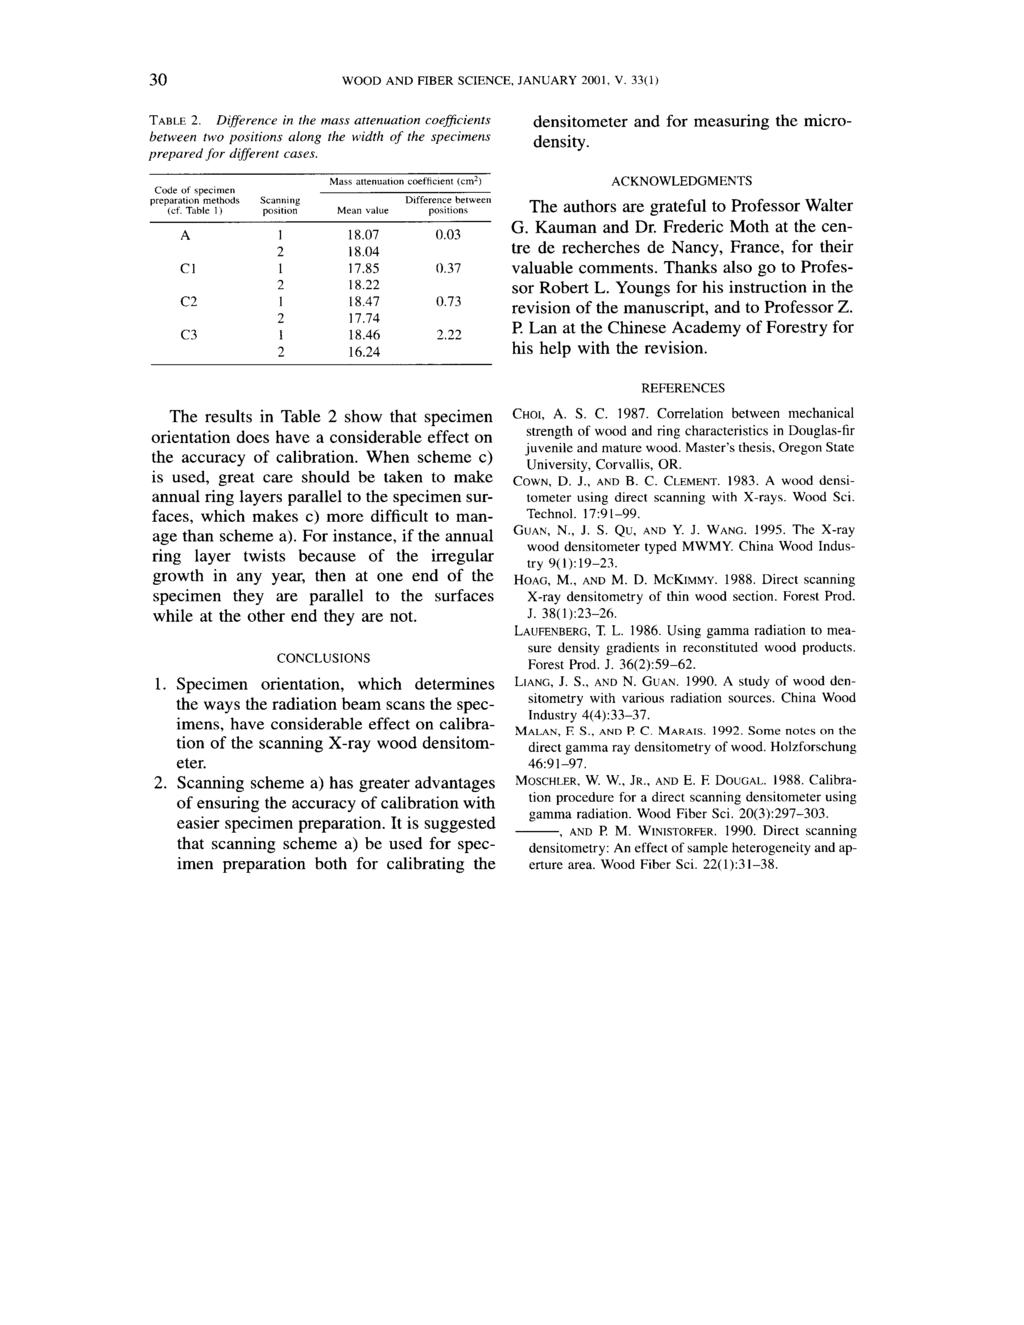 30 WOOD AND FIBER SCIENCE, JANUARY 2001, V. 33(1) TABLE 2. Difference in the mass attenuation coeficients between two positions along the width of the specimens prepared for different cases.